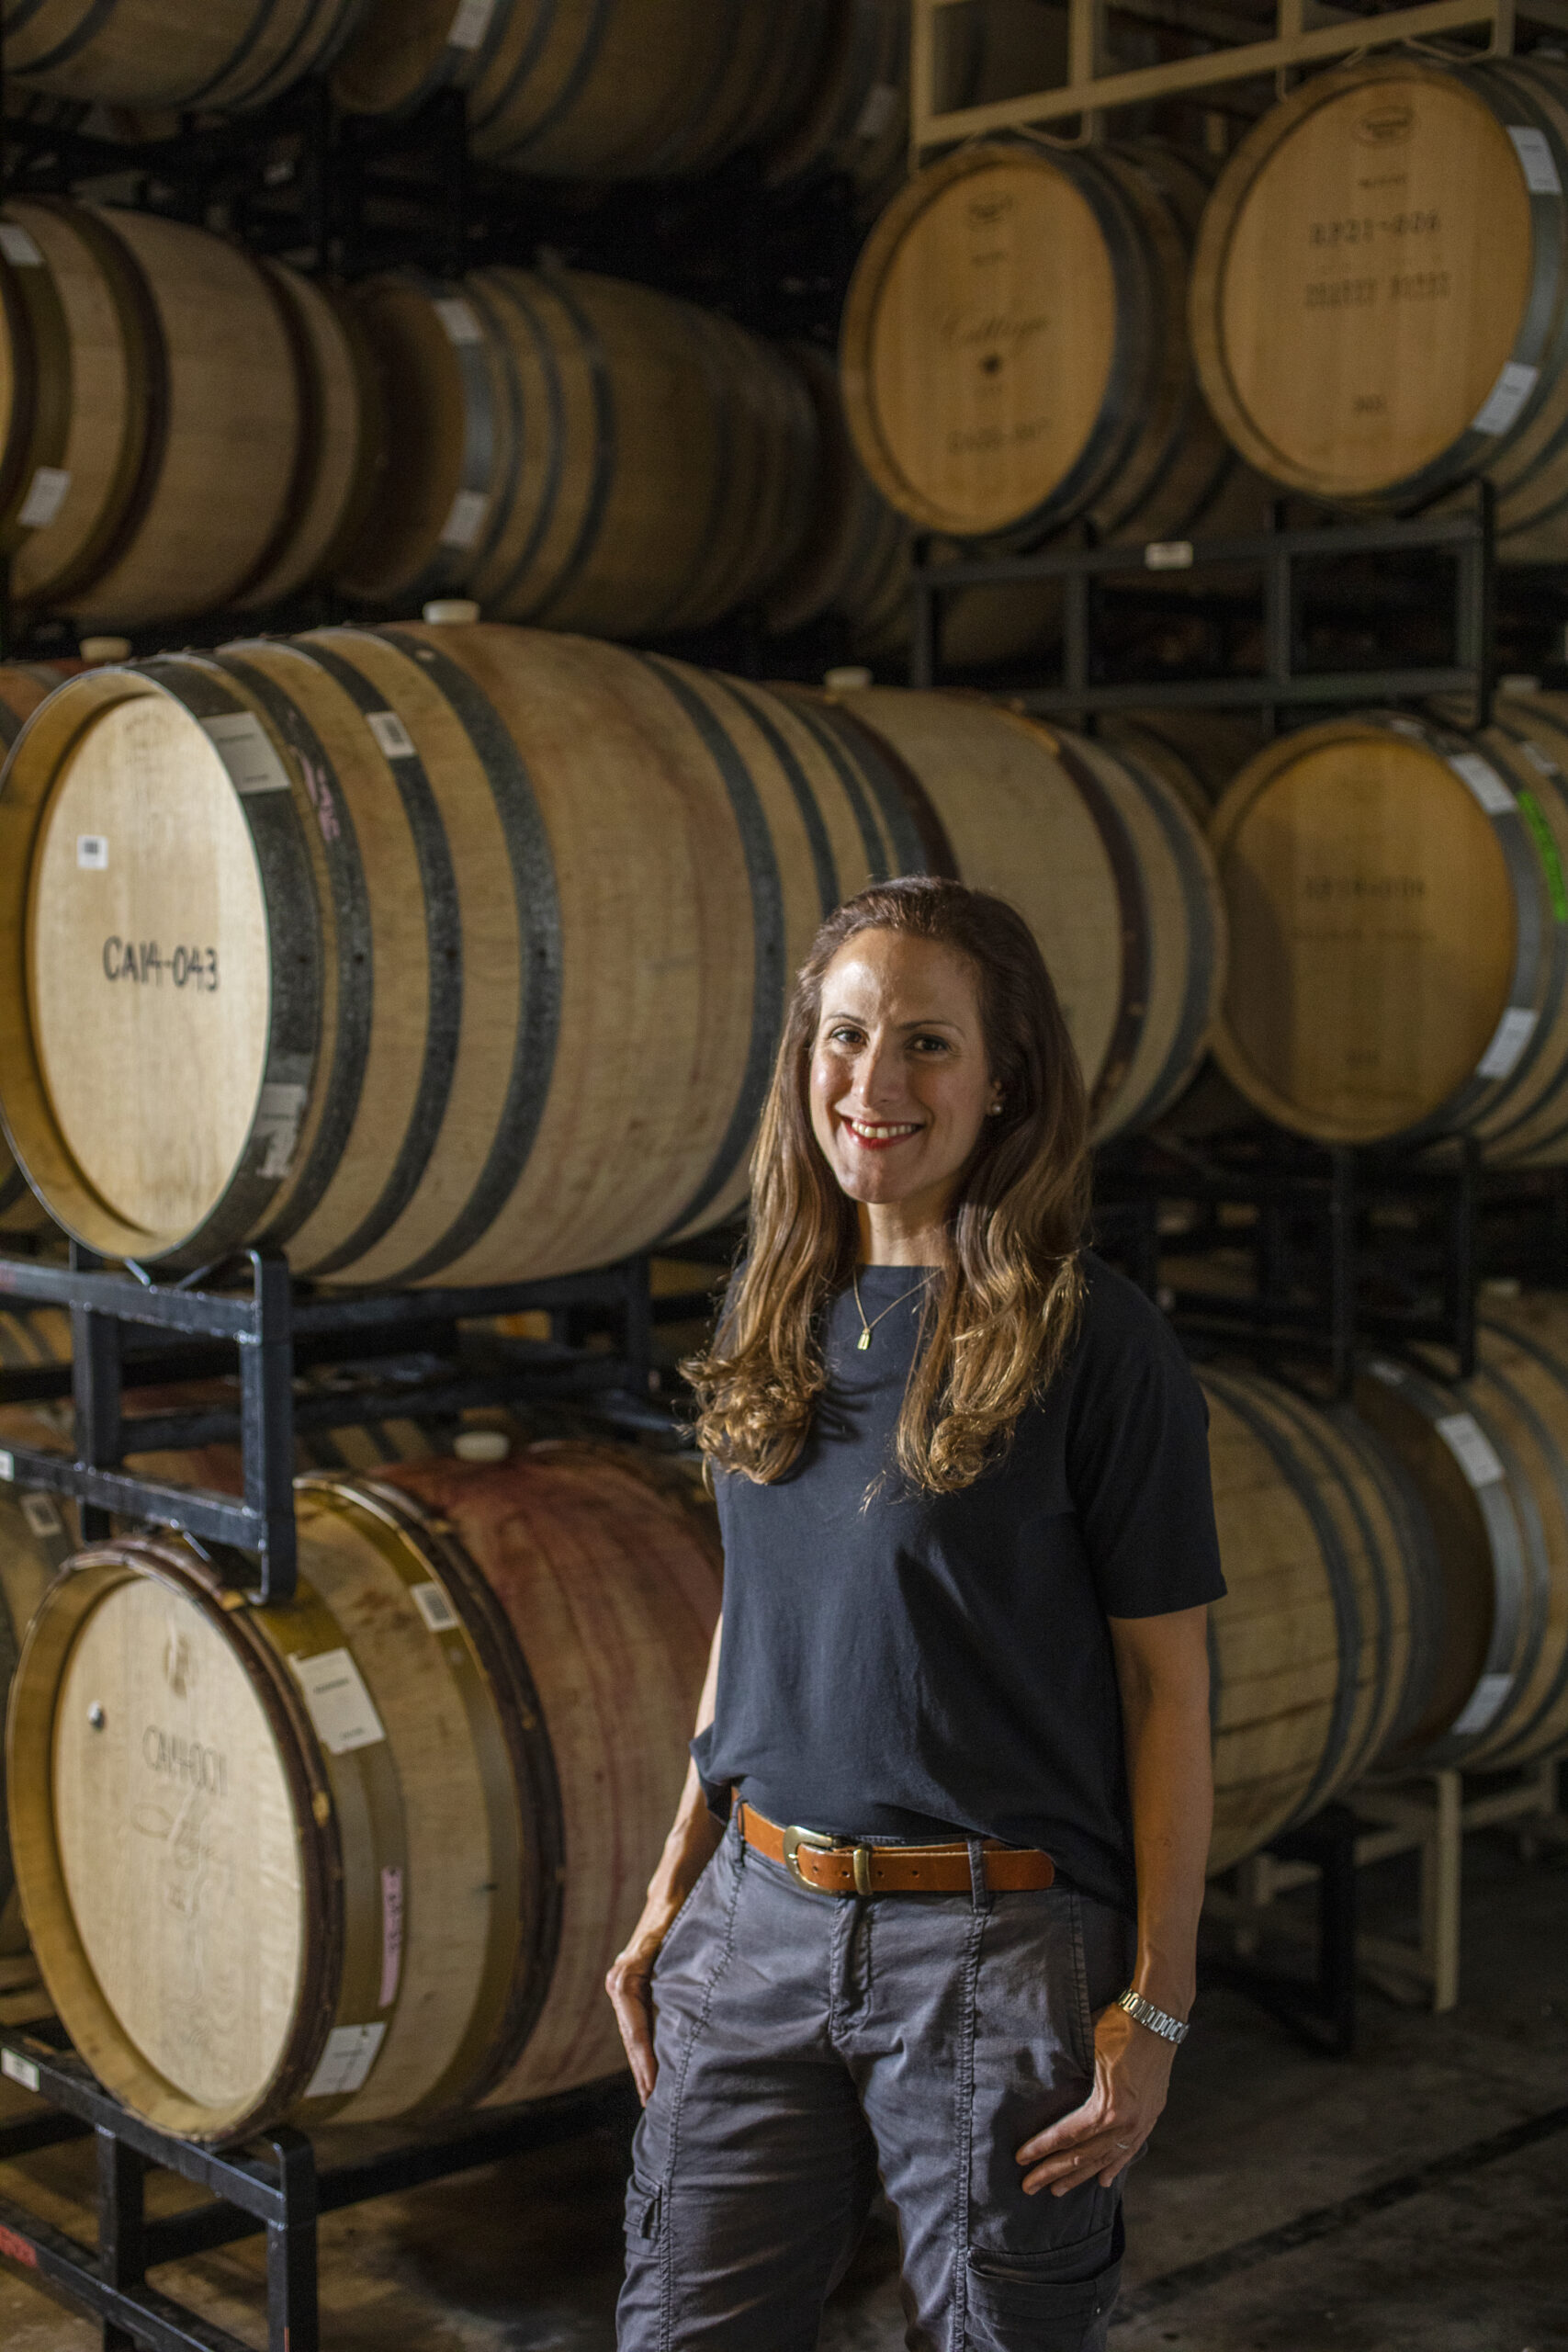 Winemaker Bibiana Gonzales Rave in the barrel room at the Pisoni wine production facility in Rohnert Park September 14, 2022. (Chad Surmick / The Press Democrat)